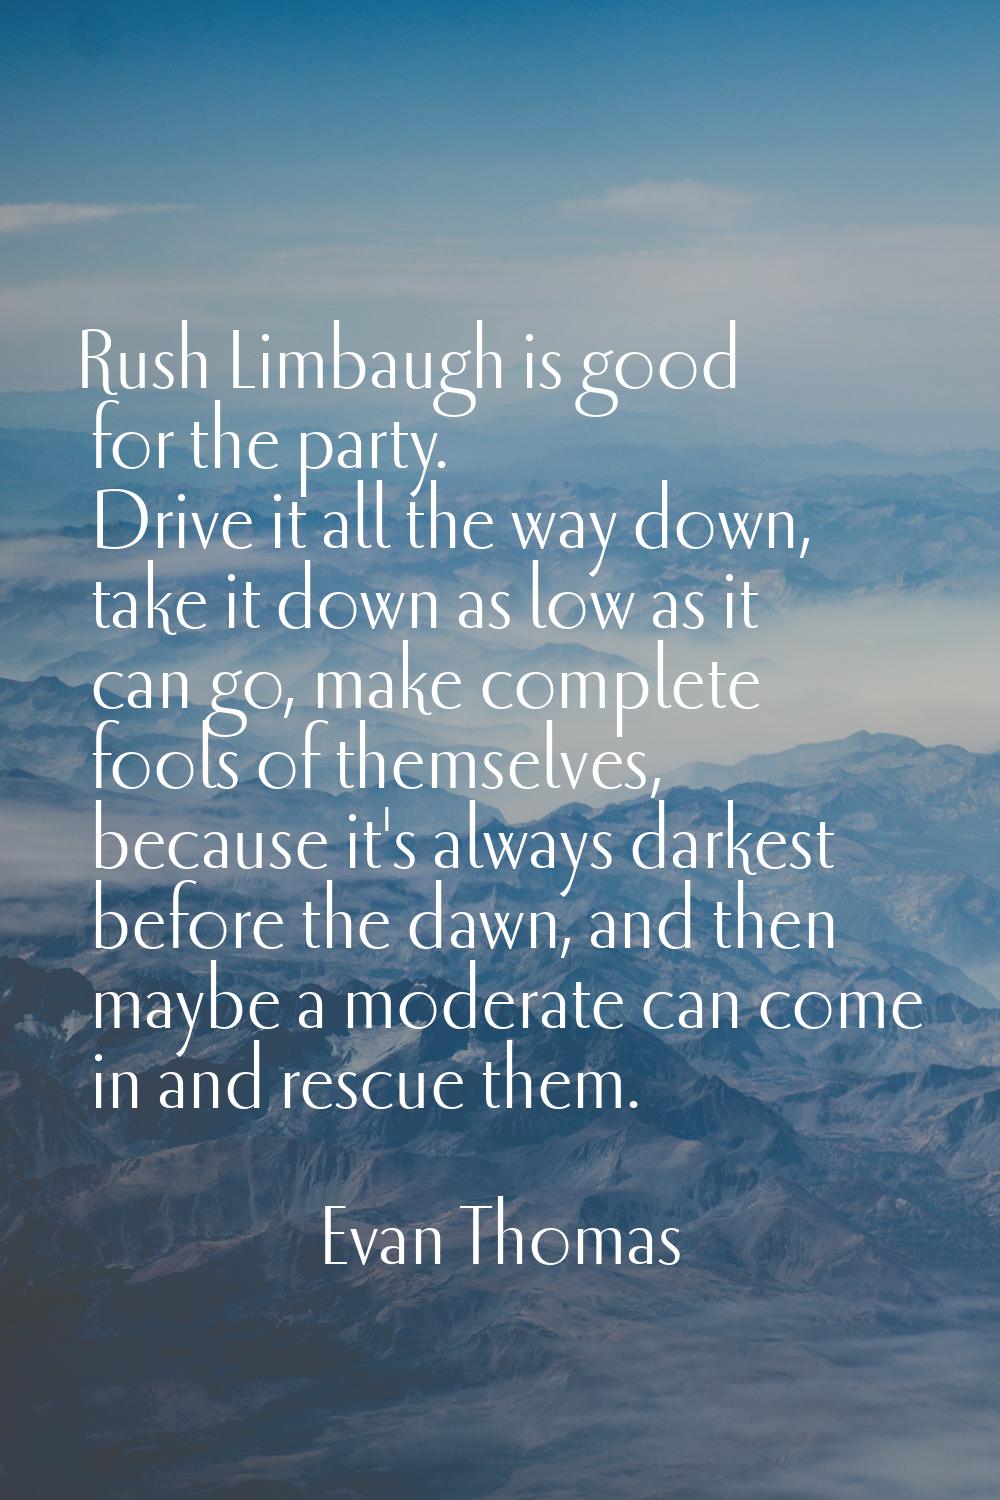 Rush Limbaugh is good for the party. Drive it all the way down, take it down as low as it can go, m